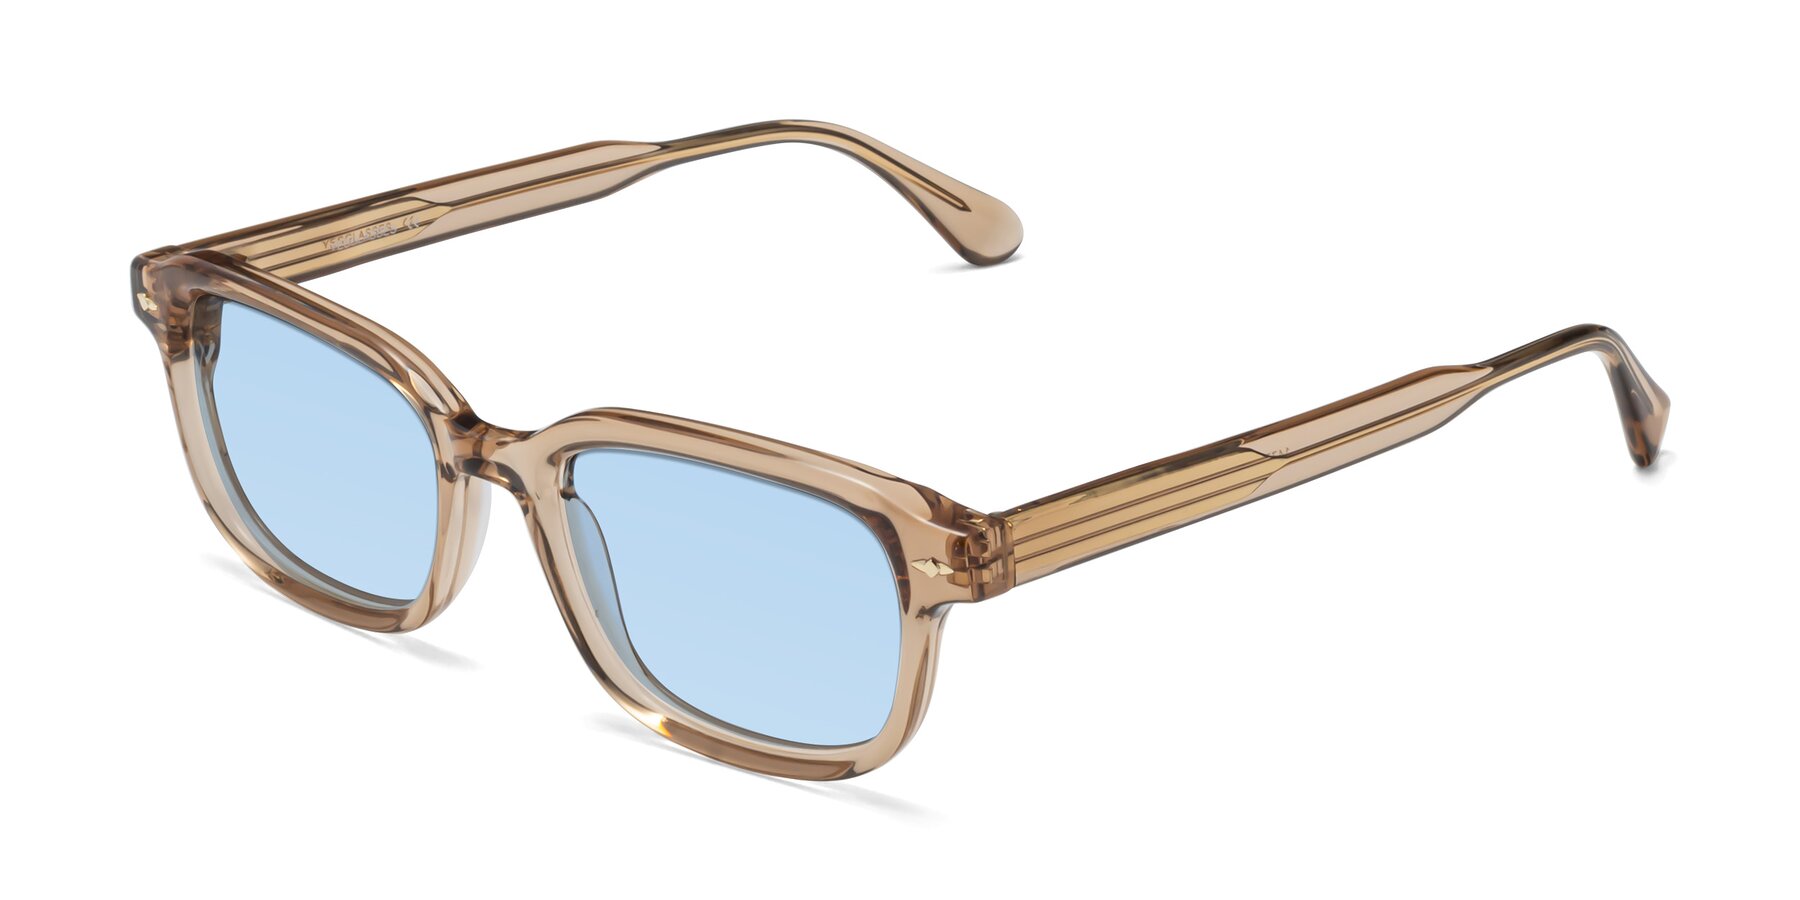 Angle of 1477 in Caramel with Light Blue Tinted Lenses